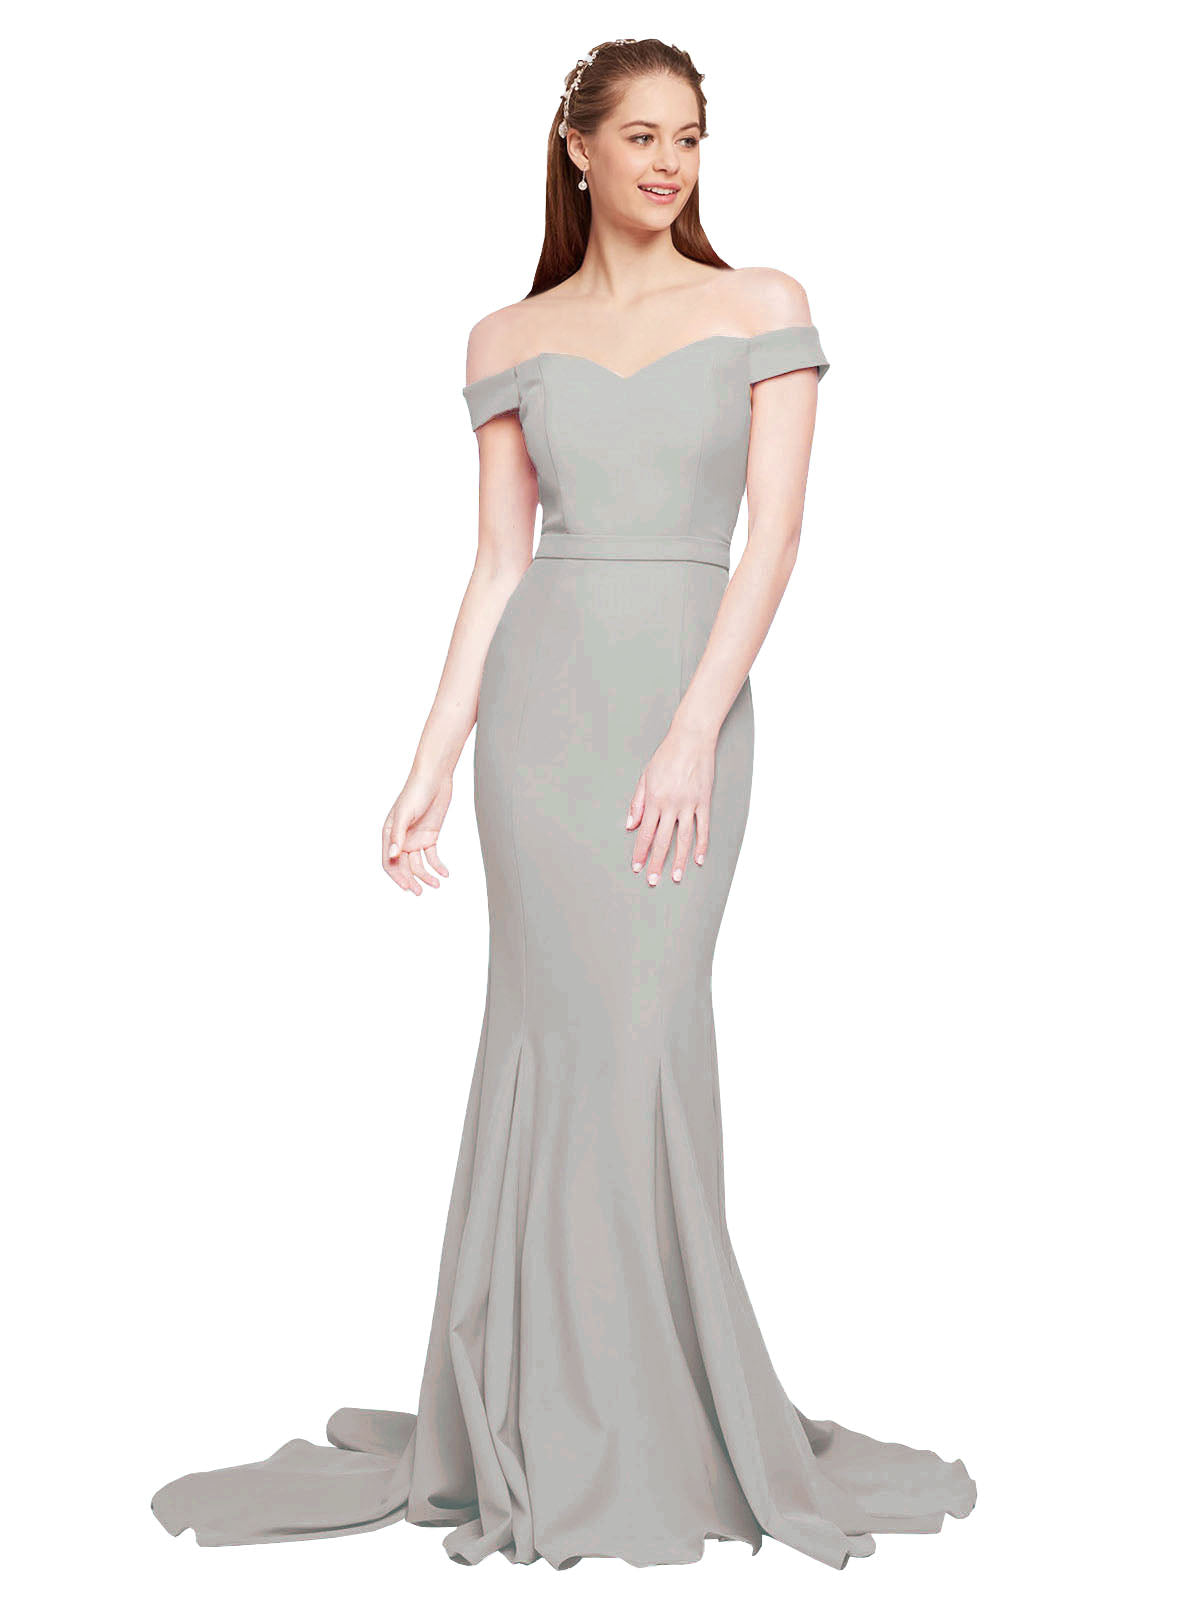 RightBrides Jannet Long Mermaid Off the Shoulder Sweetheart Sweep Train Floor Length Sleeveless Oyster Silver Stretch Crepe Bridesmaid Dress